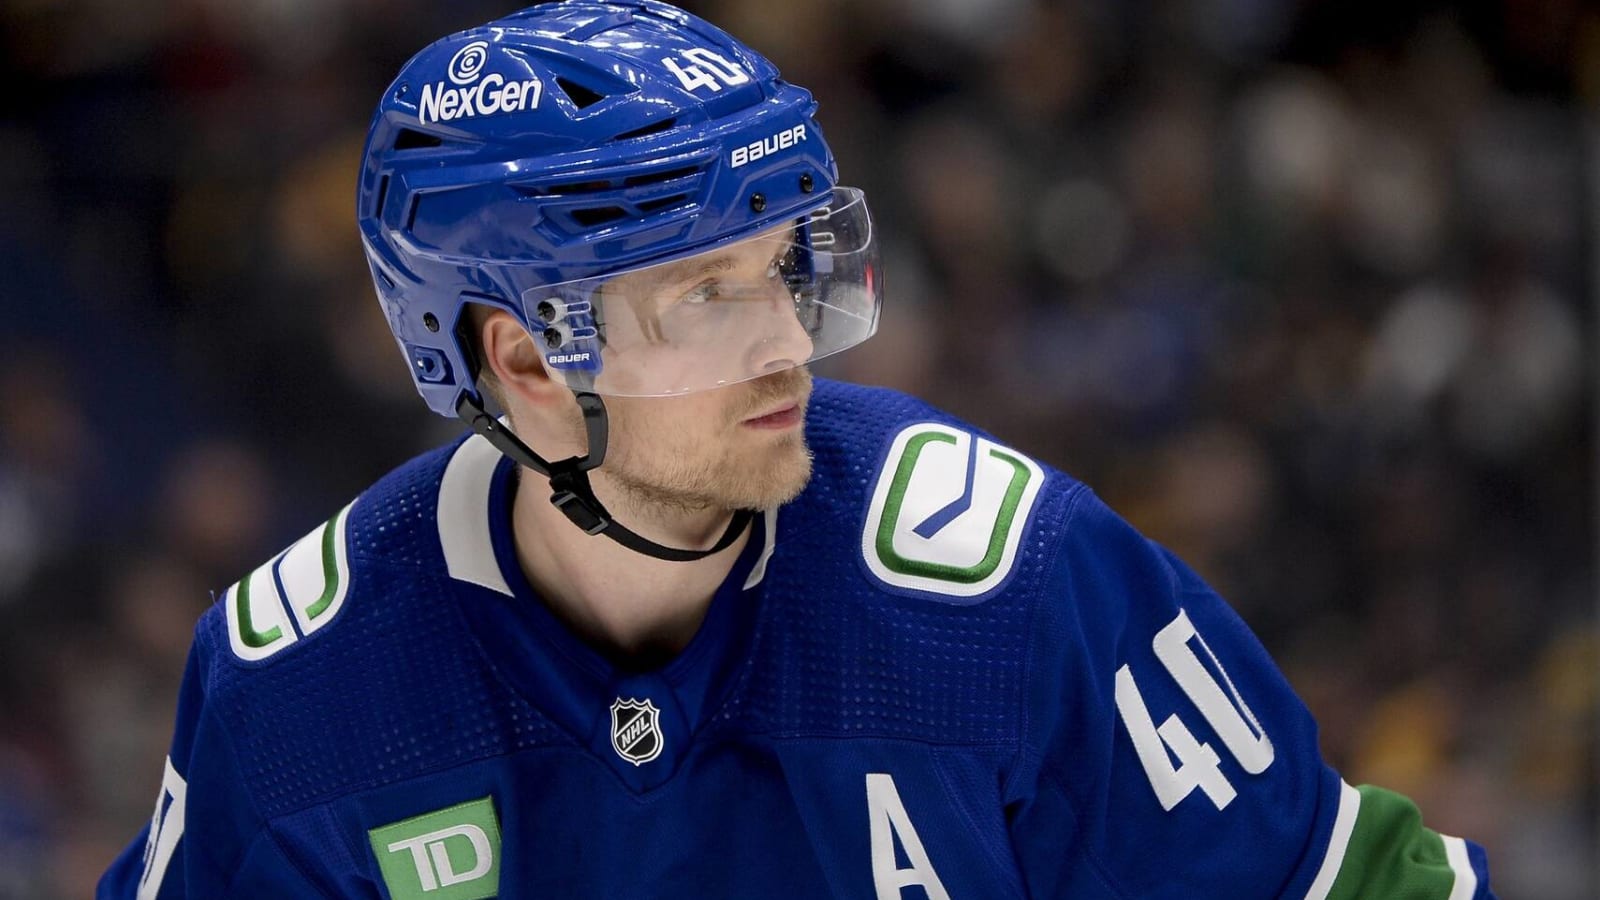 At first glance, the Elias Pettersson extension looks like growing value for the Vancouver Canucks